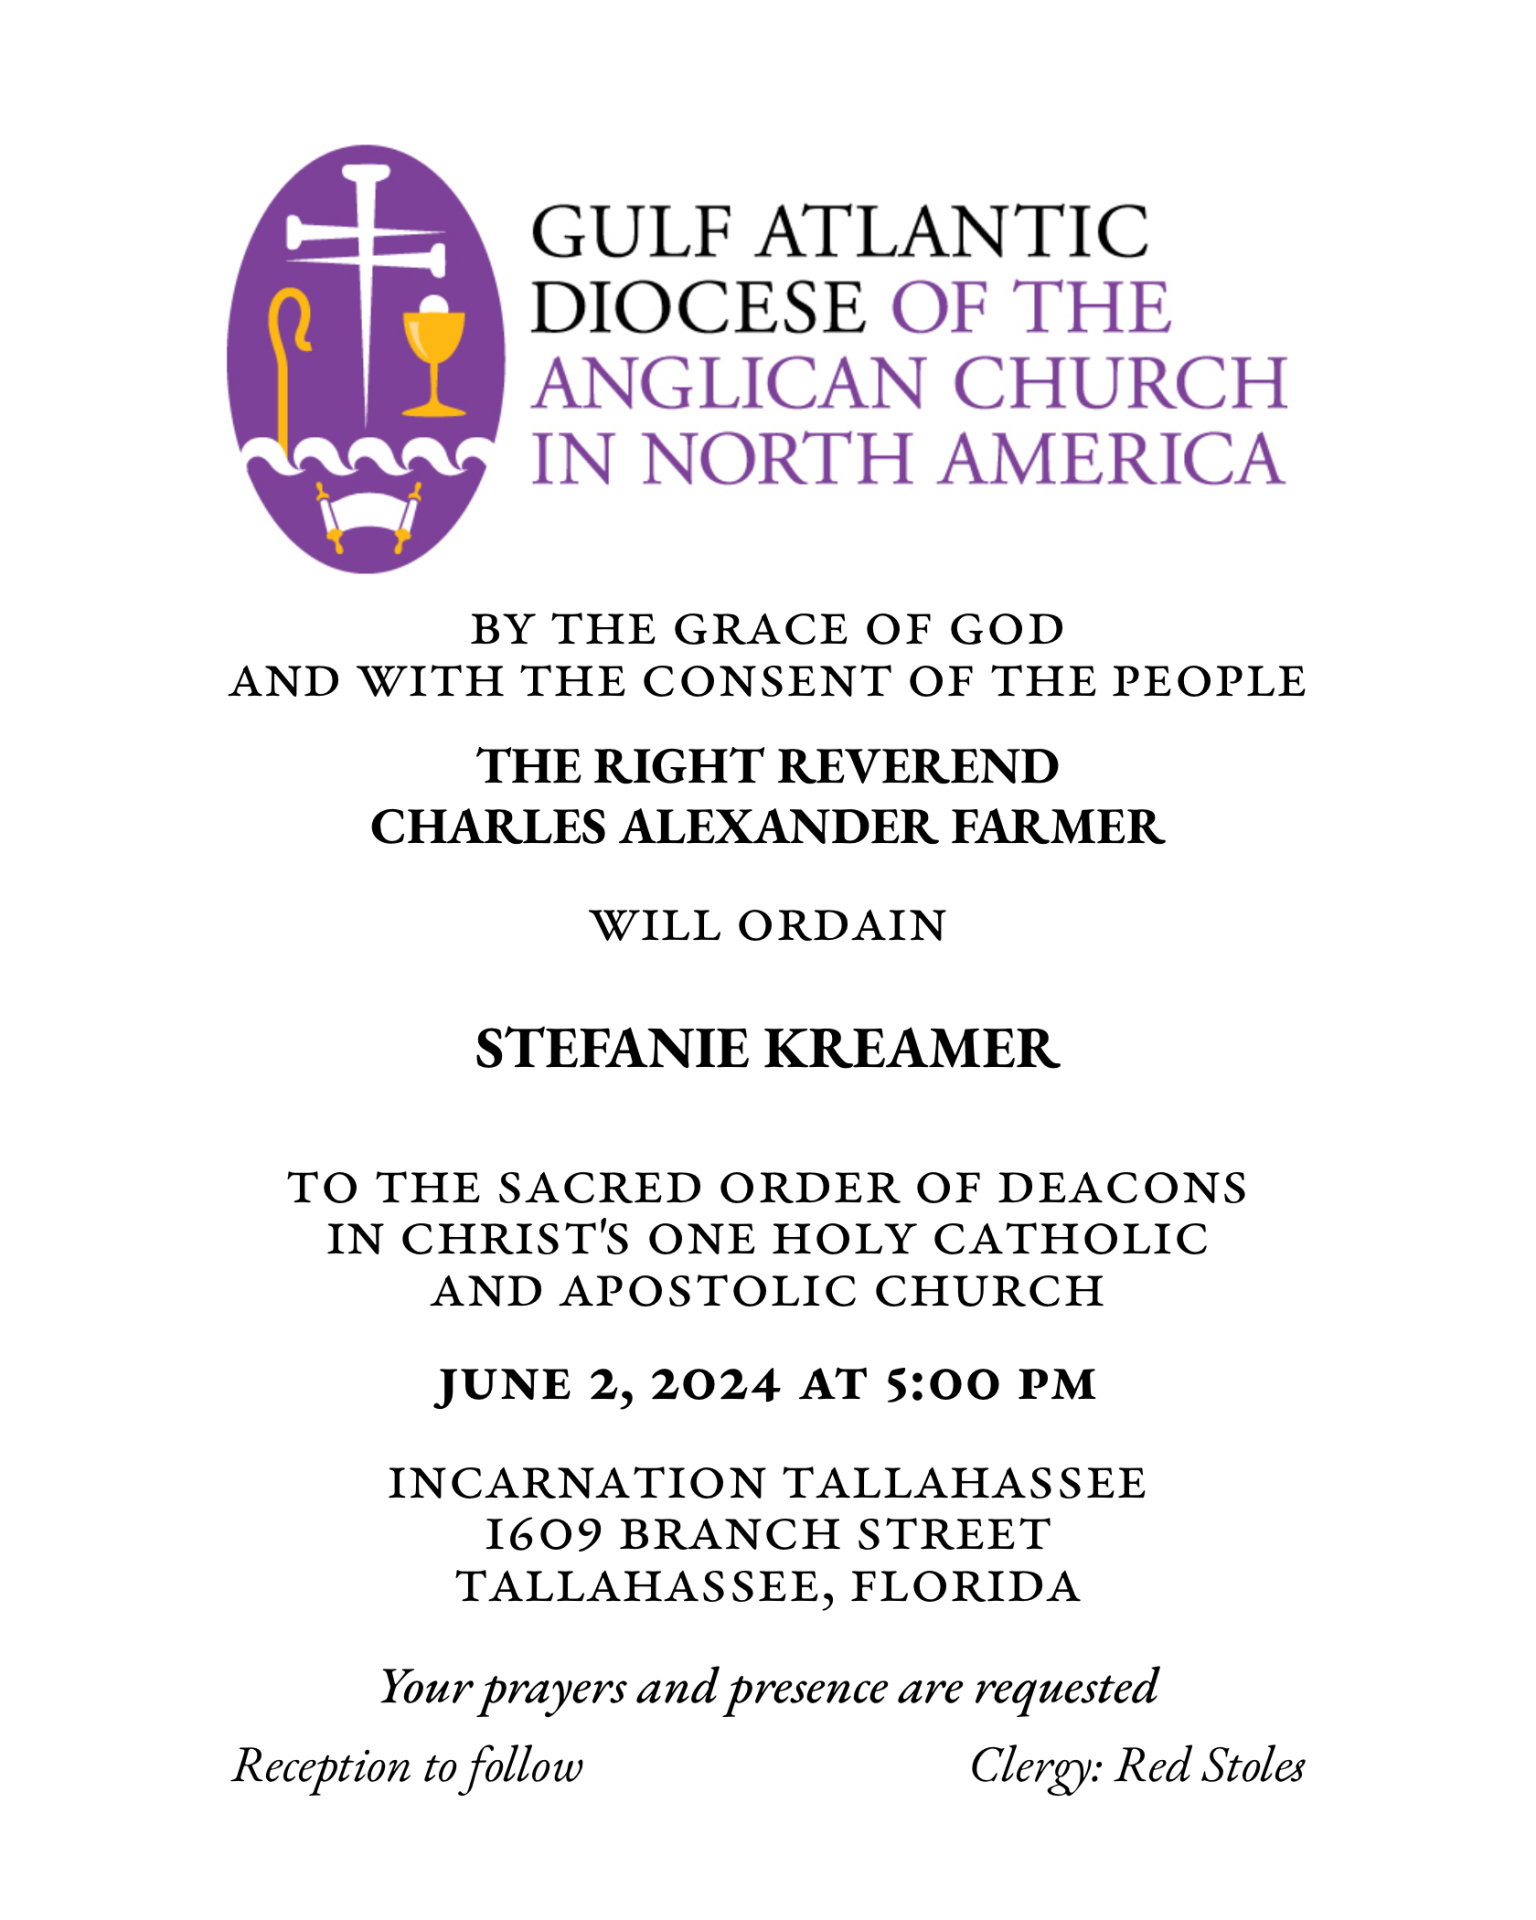 By the Grace of God and with the consent of the People the Right Reverend Charles Alexander Farmer will ordain Stefanie Kreamer to the Sacred Order of Deacons in Christ's One Holy Catholic and Apostolic Church 
June 2, 2024 at 5:00 p.m.
Incarnation Tallahasee
1609 Branch Street
Tallahassee, Florida
Your prayers and presence are requested.
Reception to follow.
Clergy: Red Stoles.